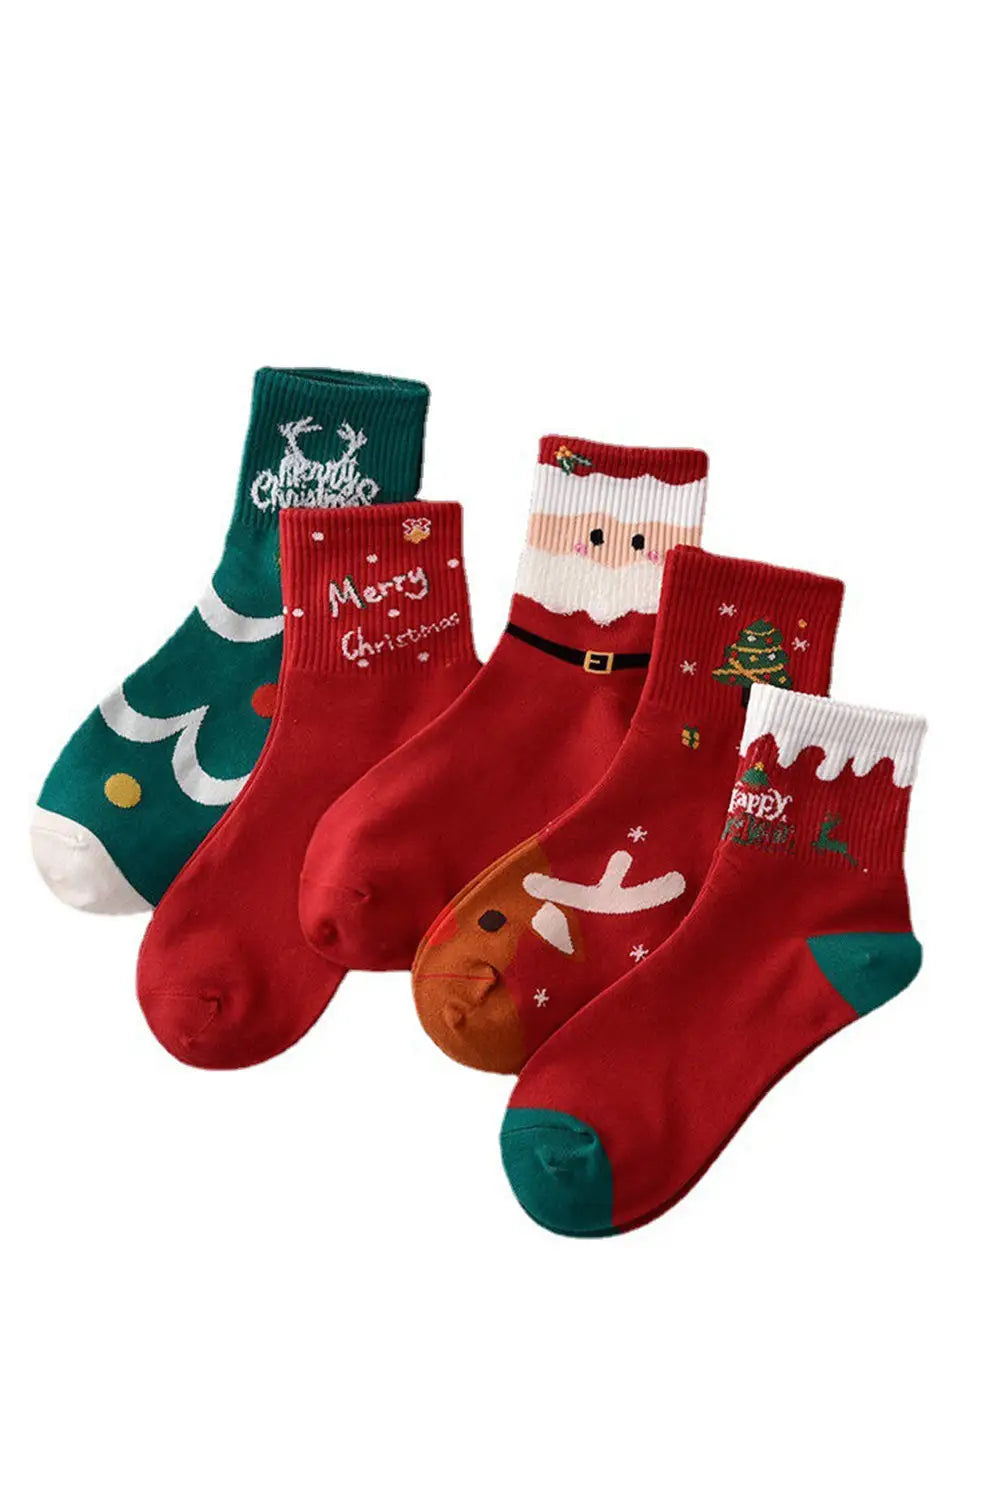 Fiery red 5 pairs festive merry christmas cartoon print socks - one size / 100% polyester - gifts